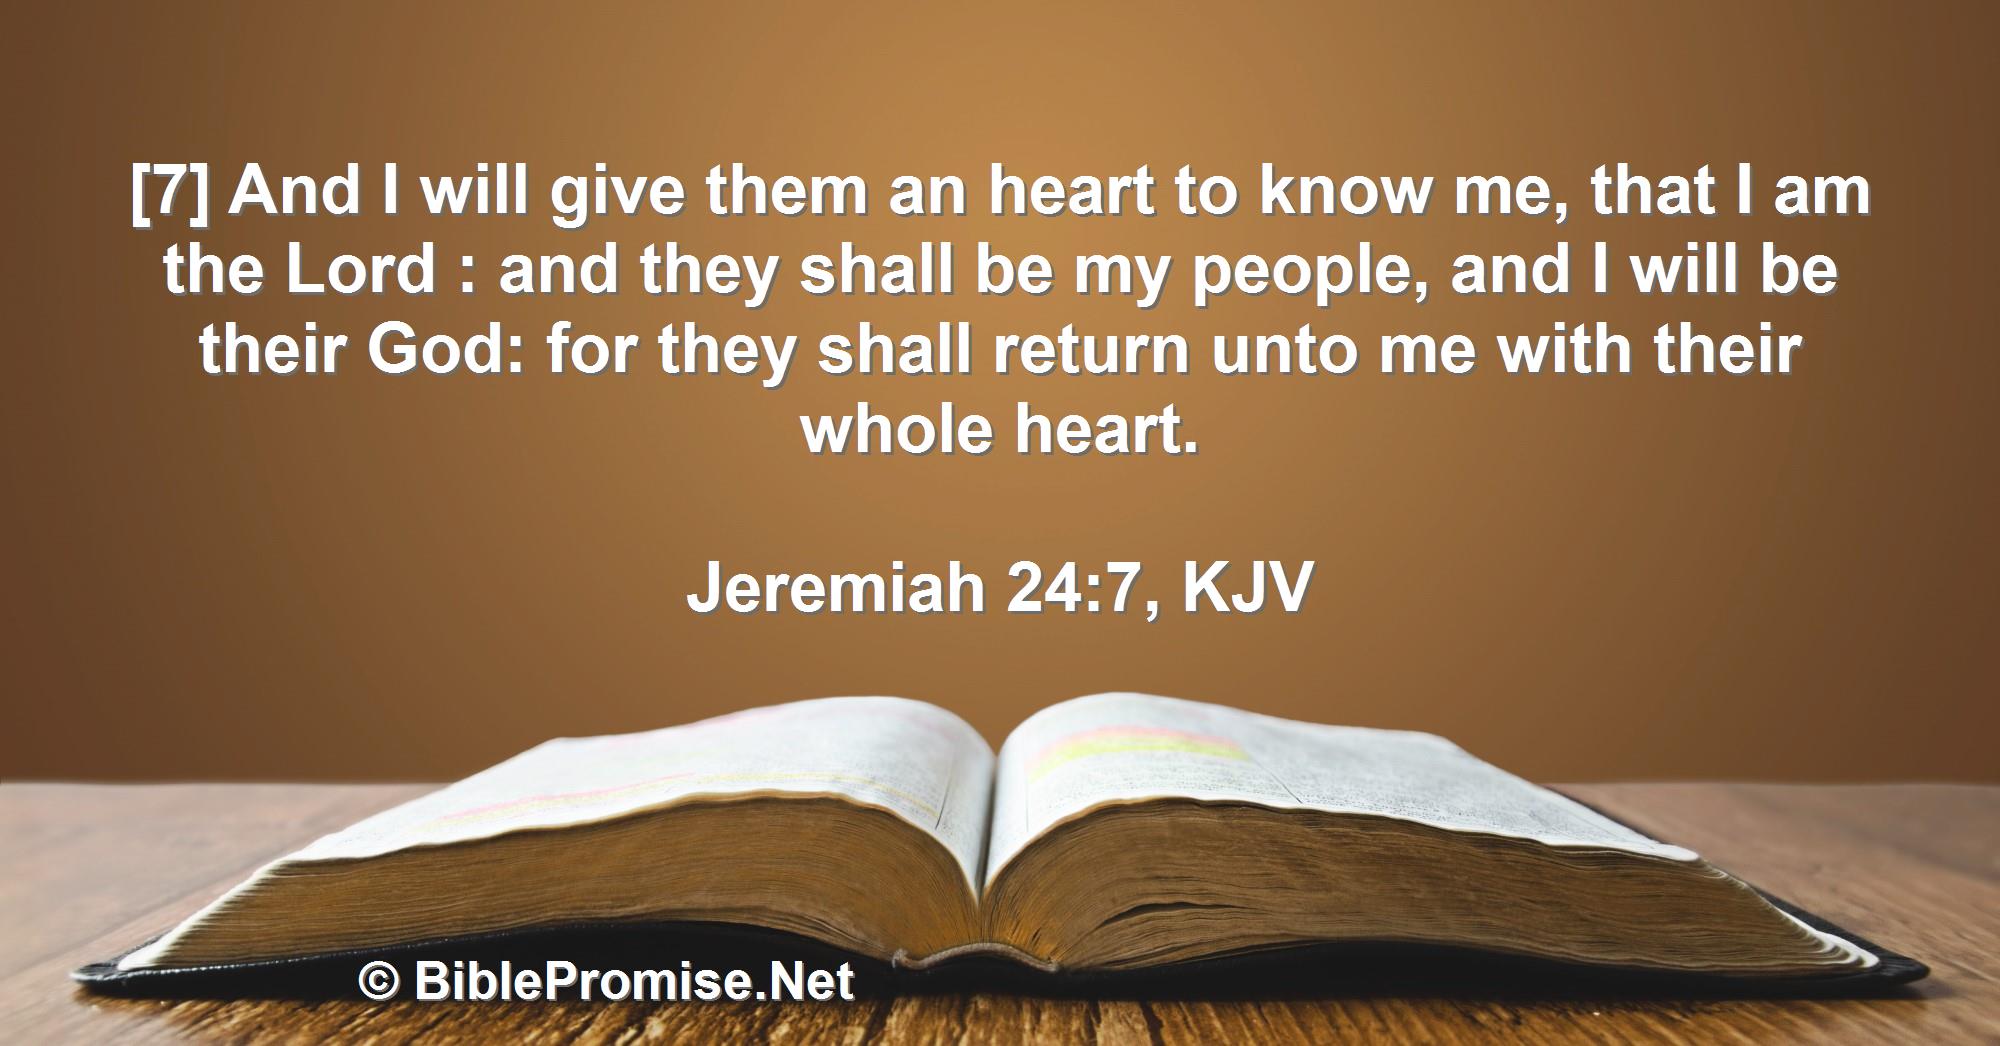 Friday, June 2, 2023 - Jeremiah 24:7 (KJV) - Bible promise that God will get close to His people.